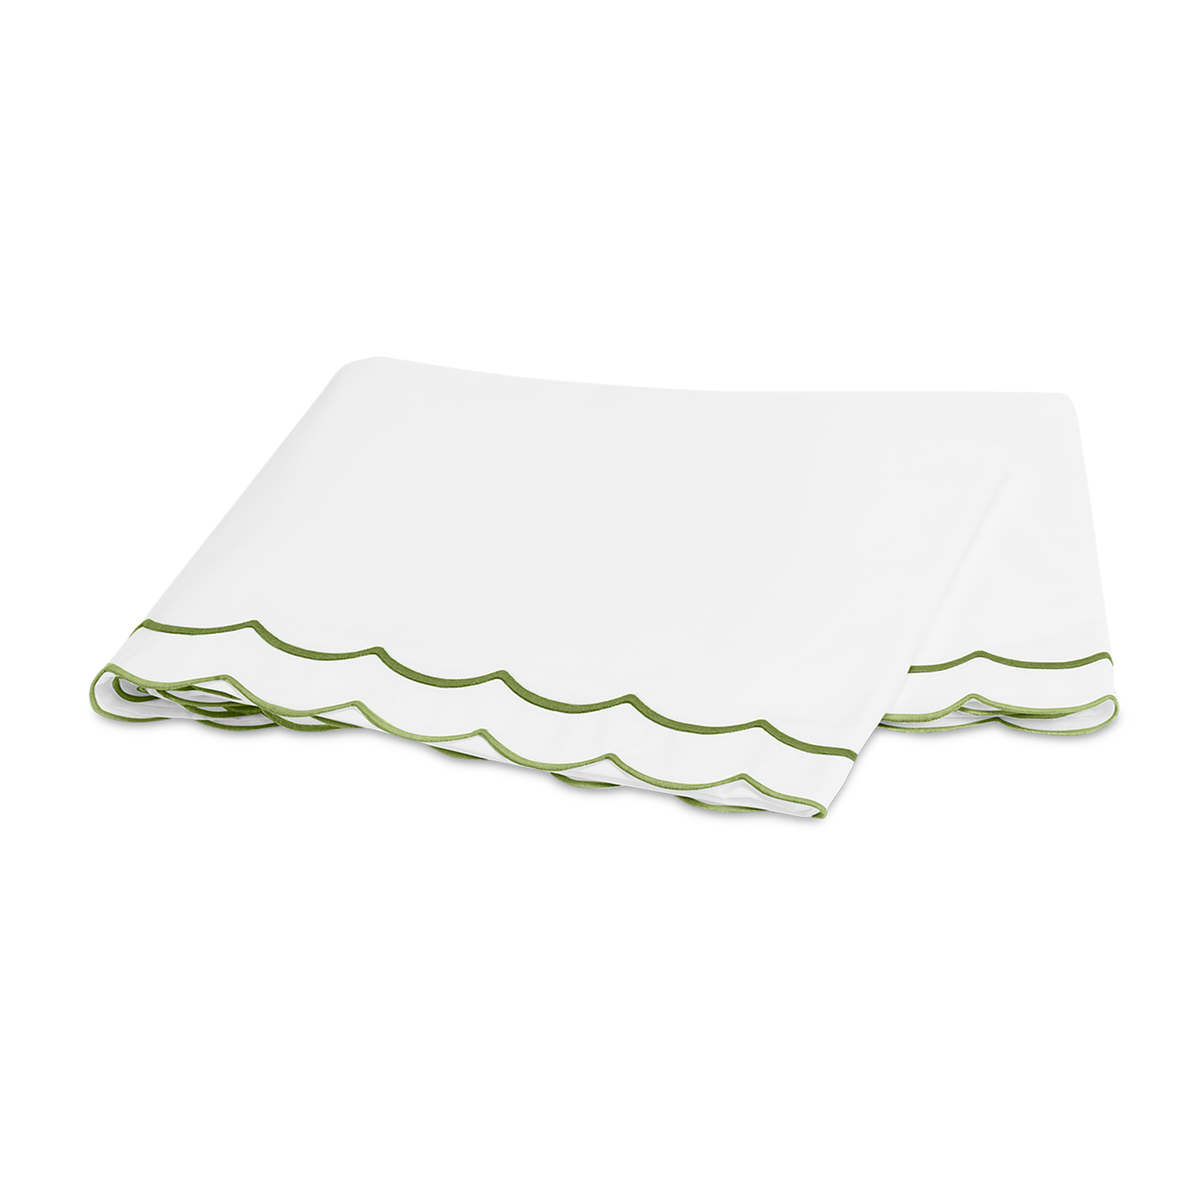 Flat Sheet of Matouk India Bedding in Grass Color